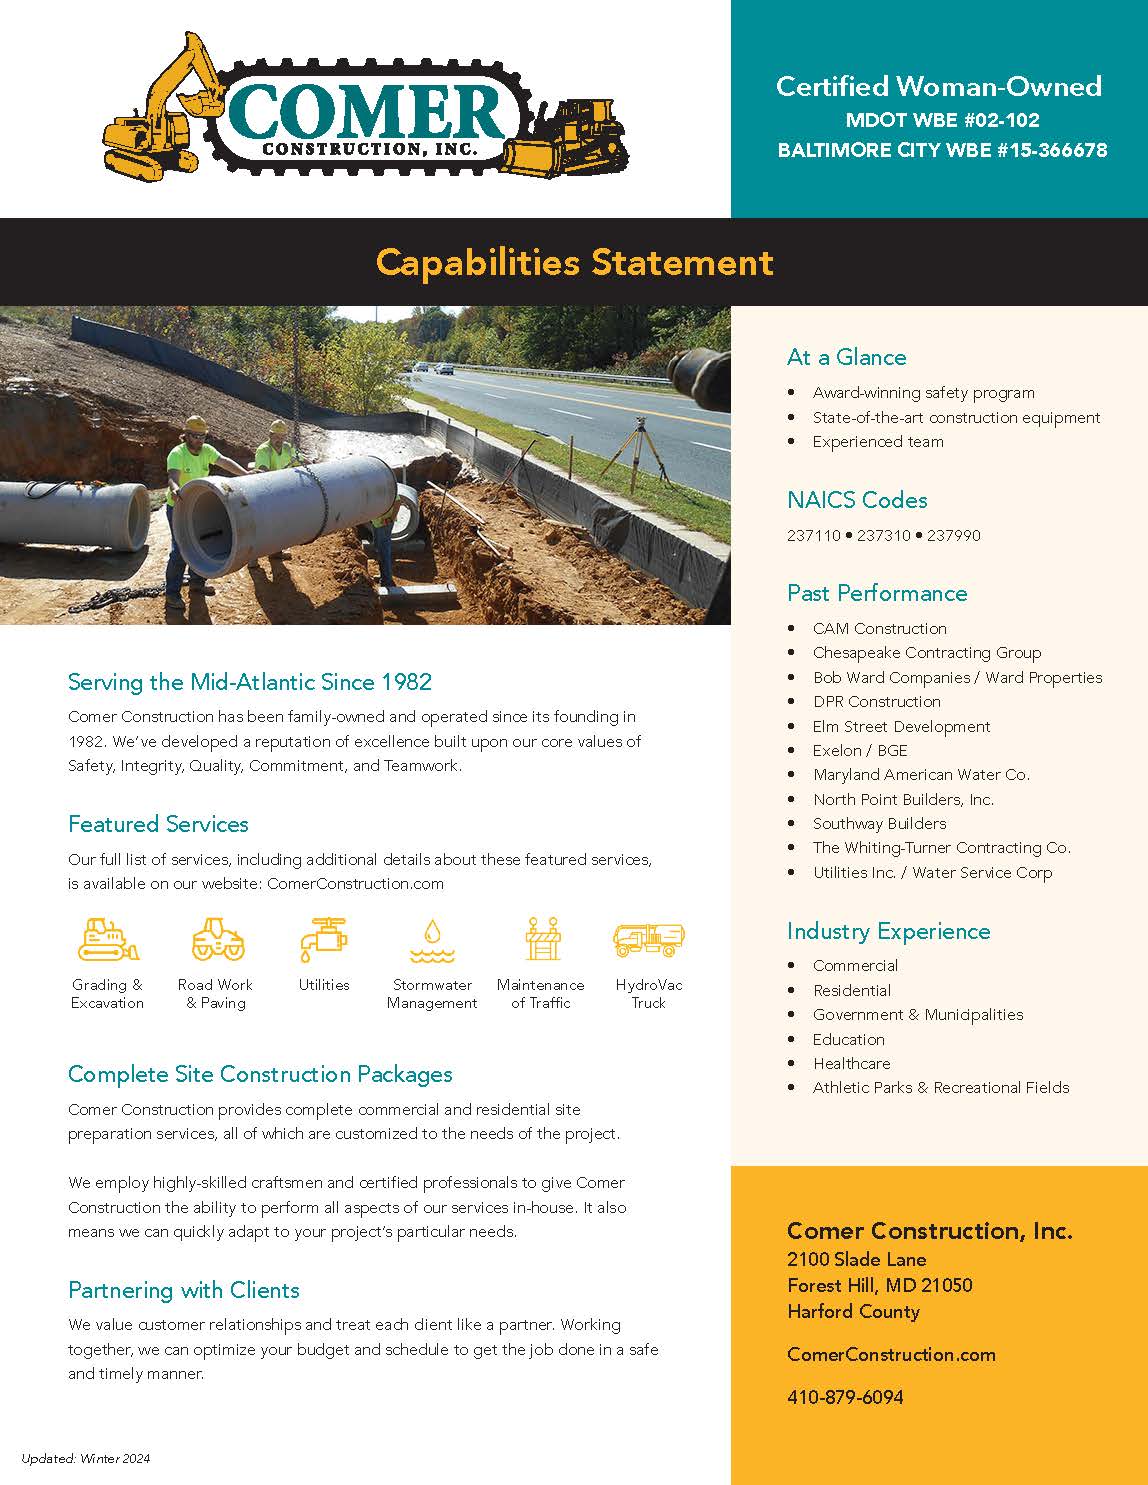 Comer Construction Capabilities Statement - Woman Owned Small Business Capababilities